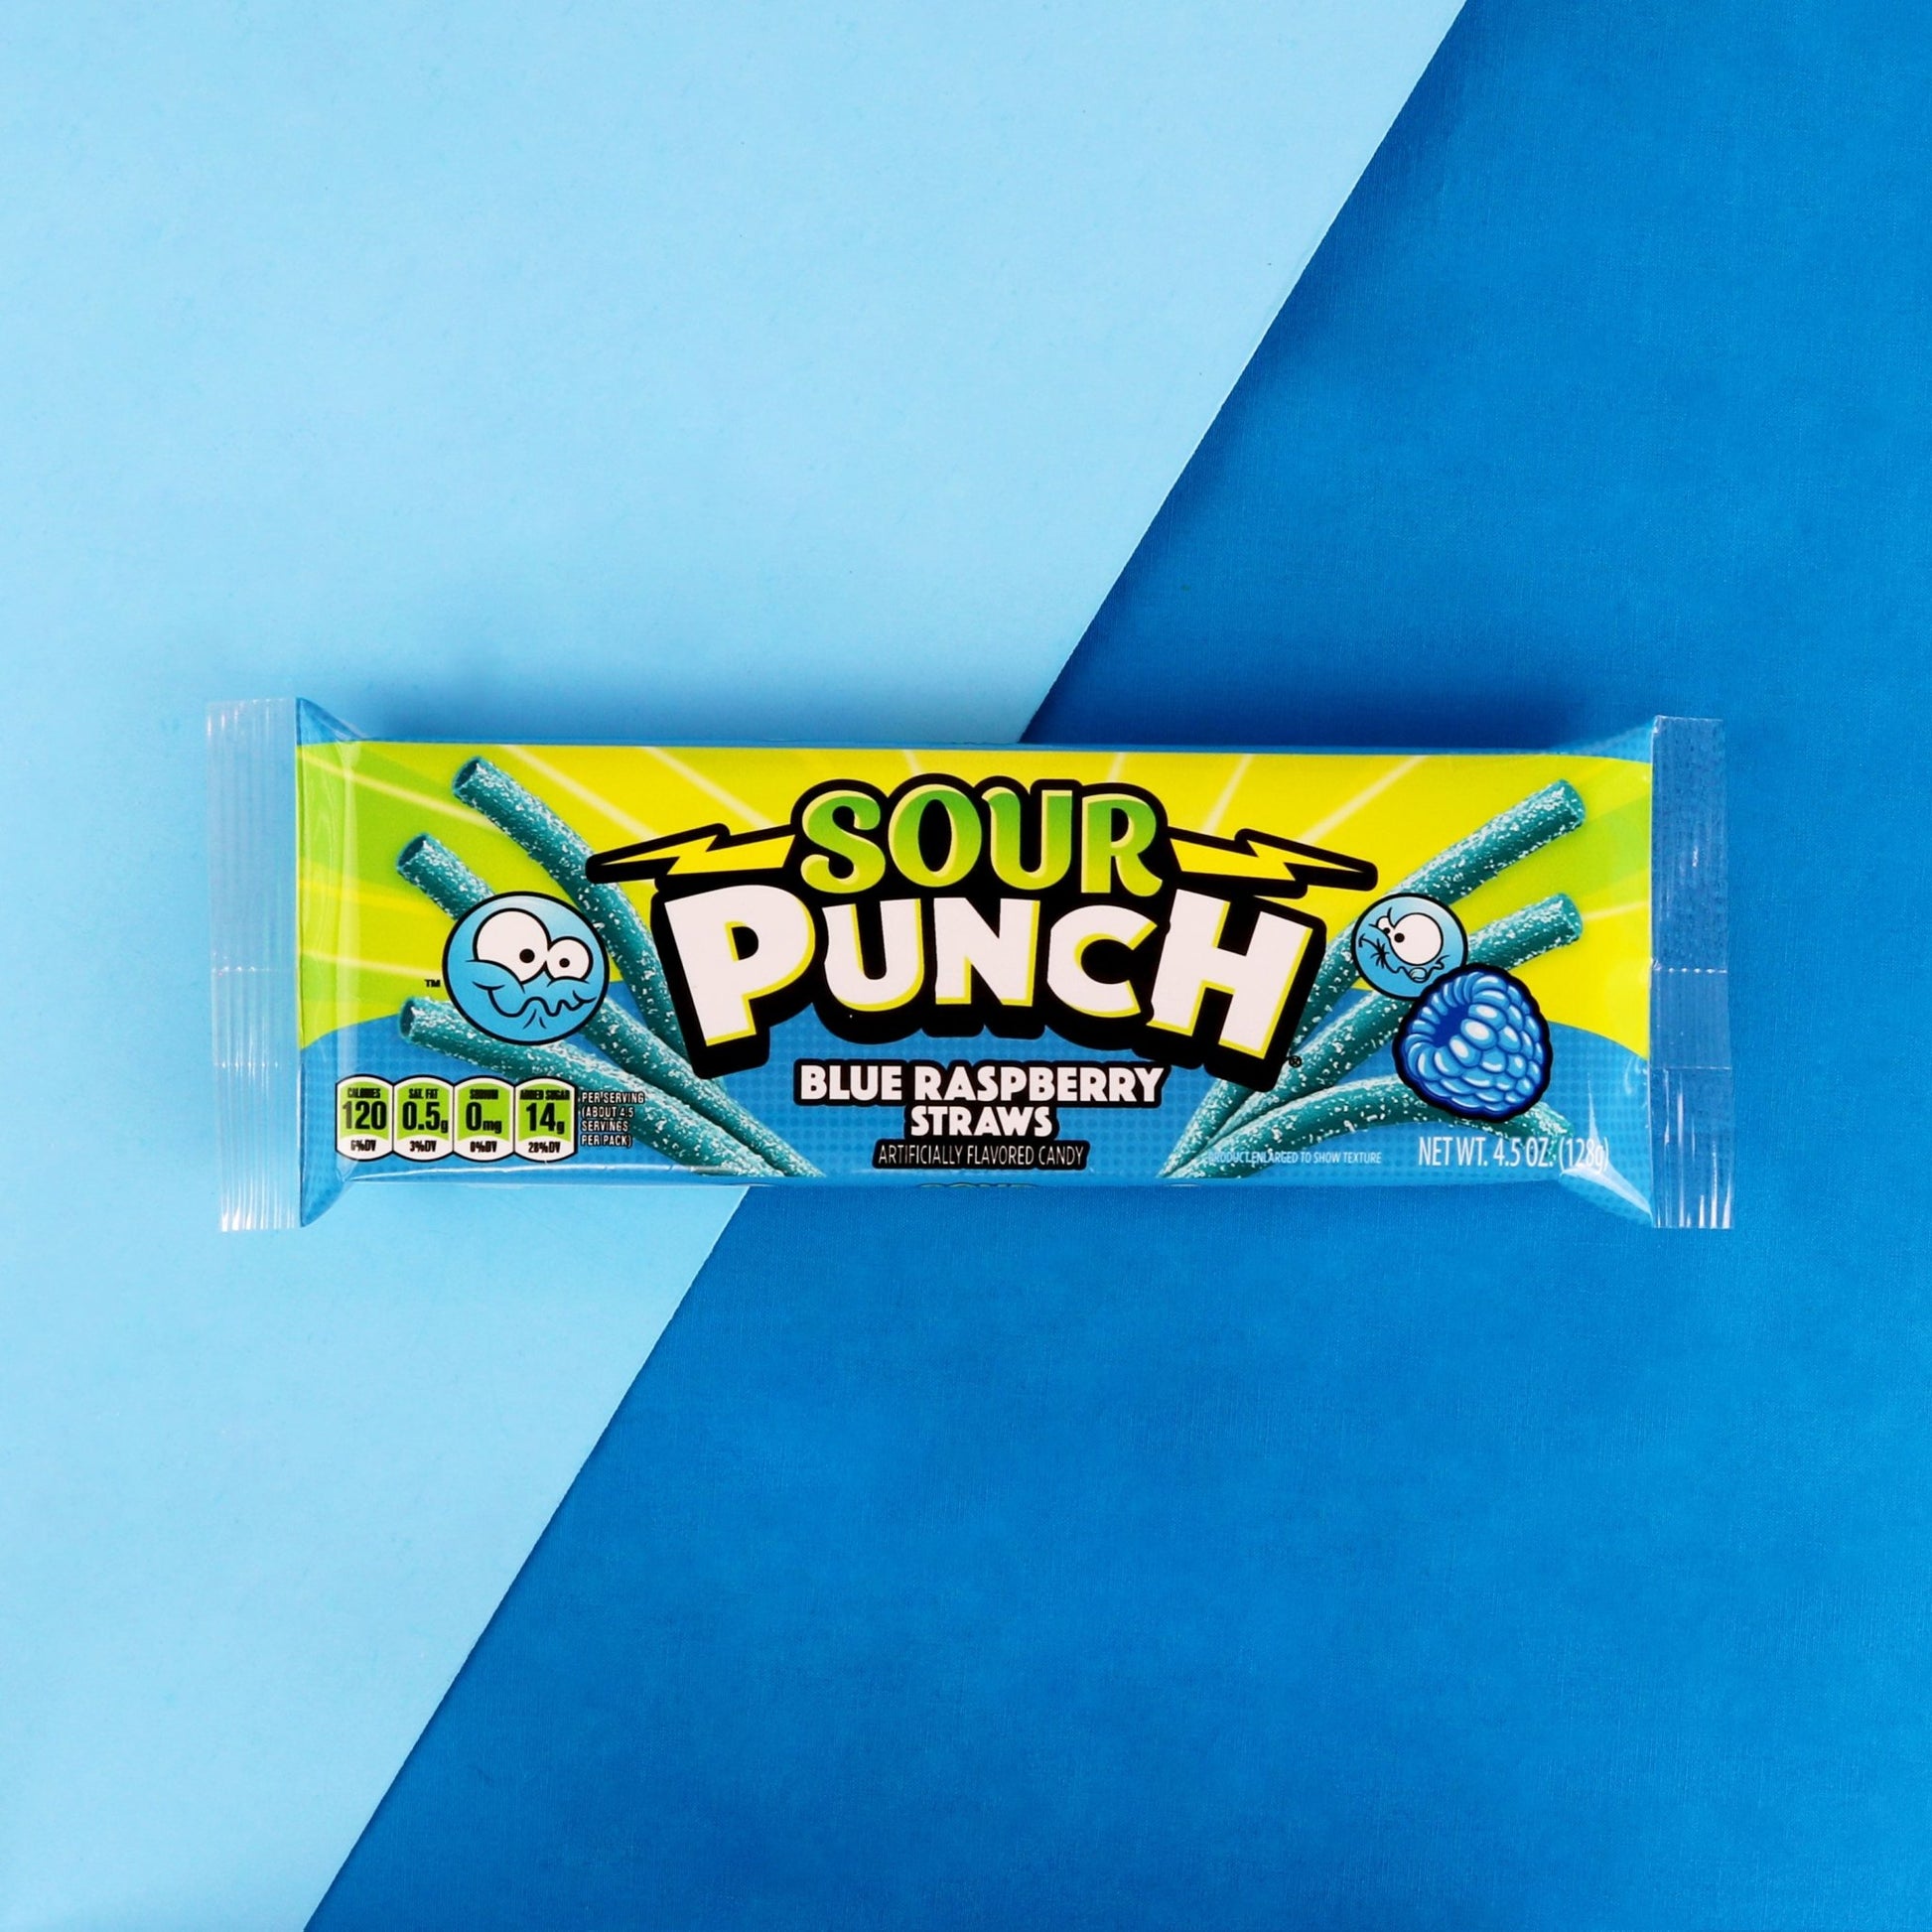 4.5oz SOUR PUNCH Blue Raspberry Straws Tray with blue background